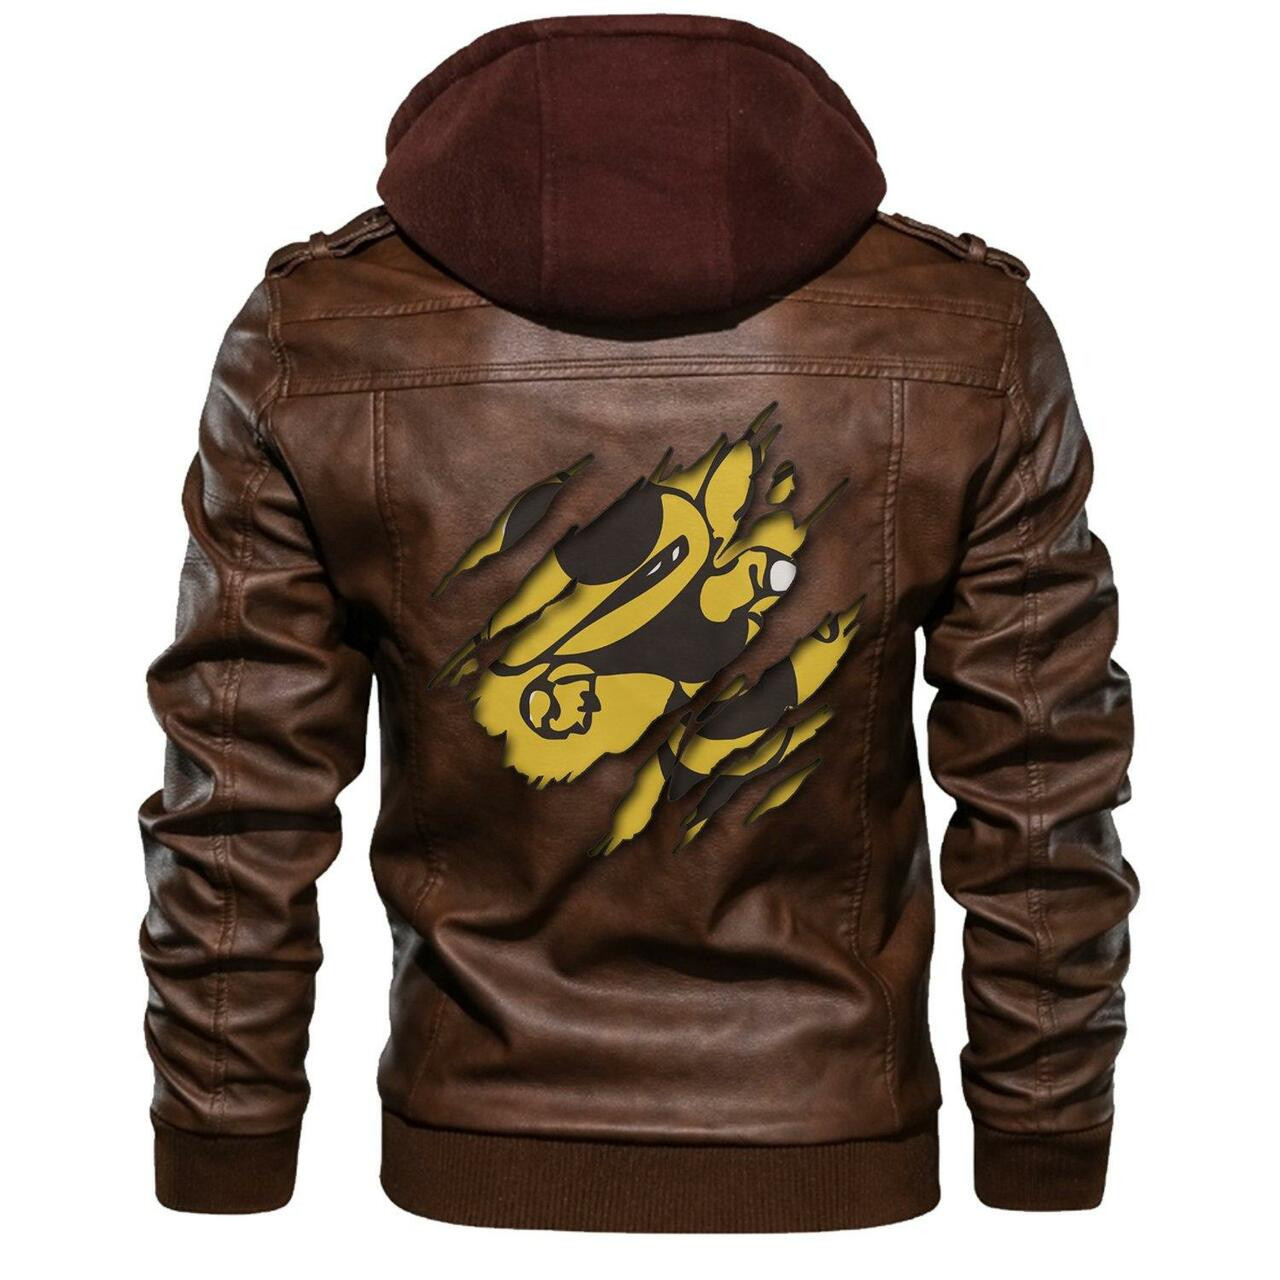 These Amazing Leather Jacket will add to the appeal of your outfit 165